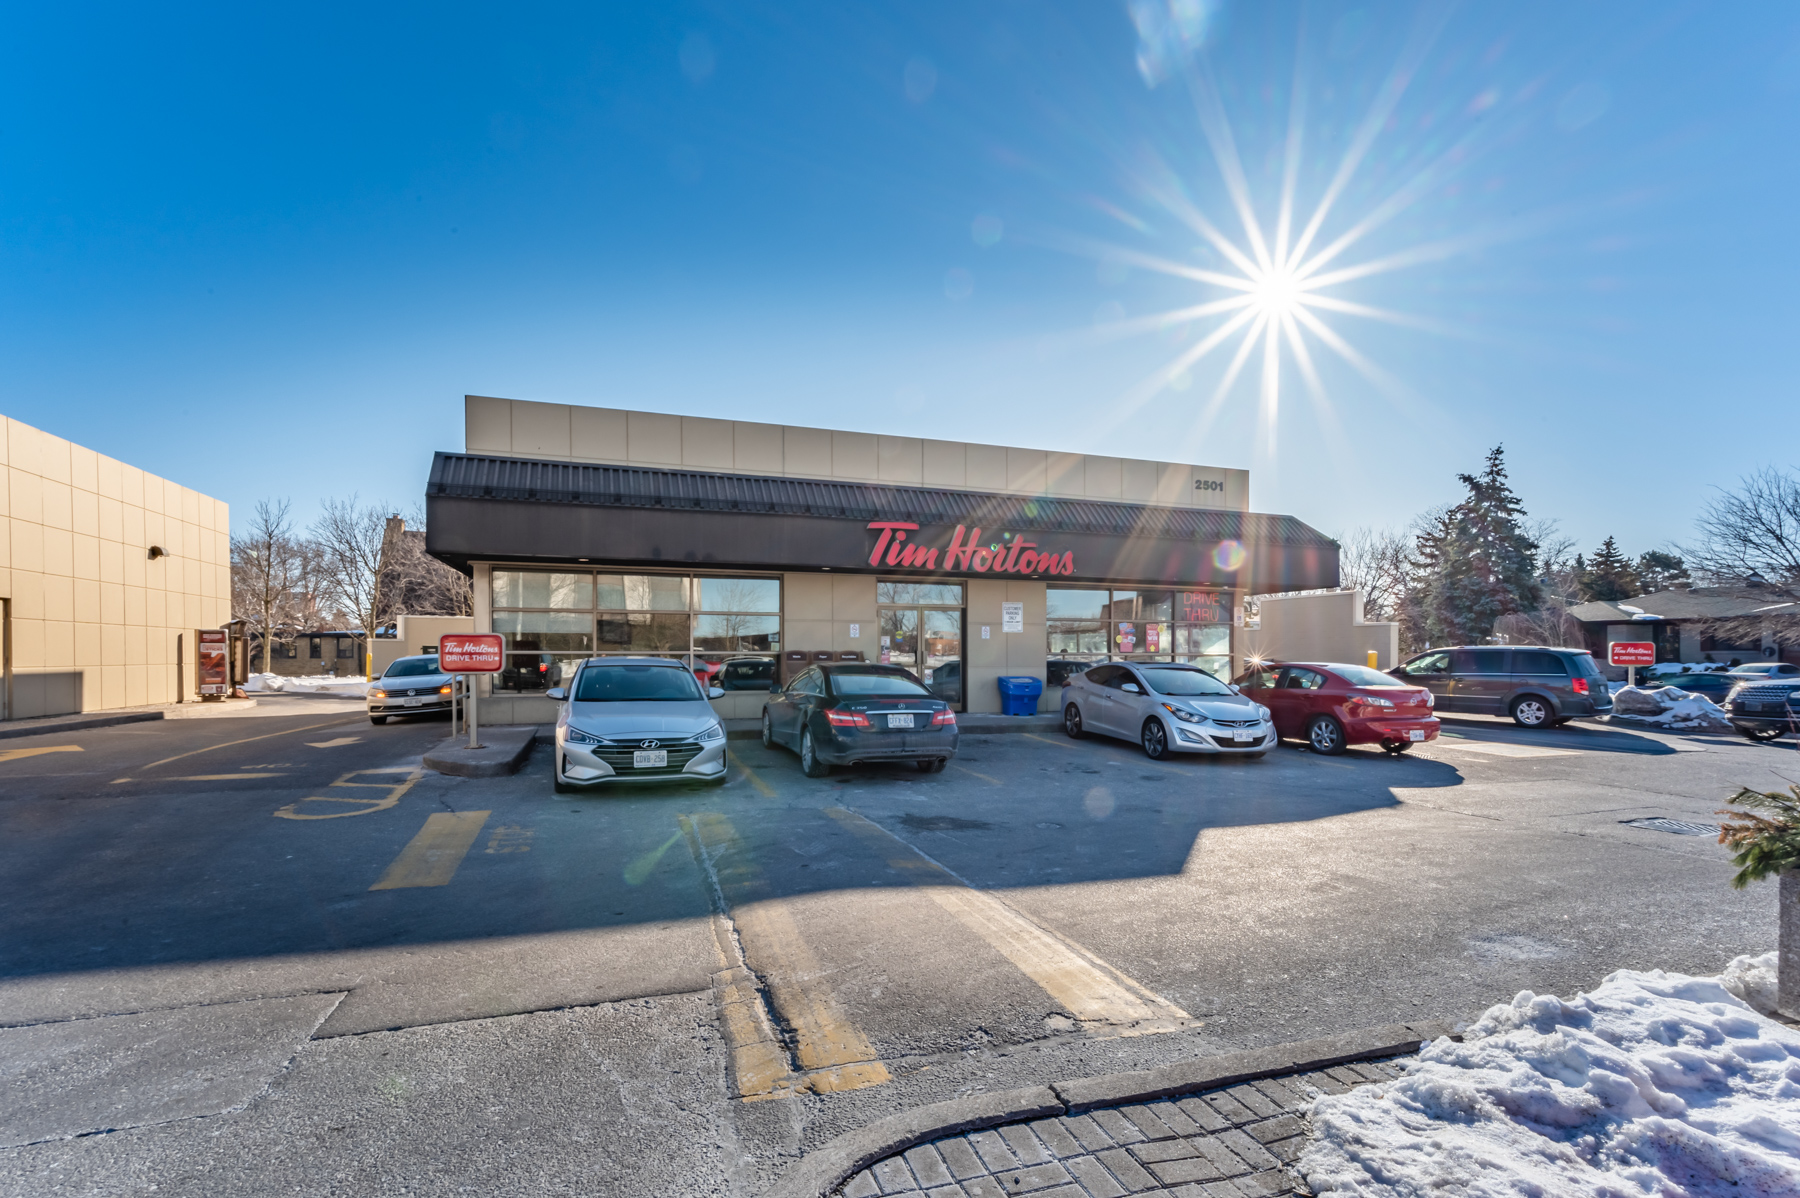 Cars parked in front of Tim Hortons restaurant.